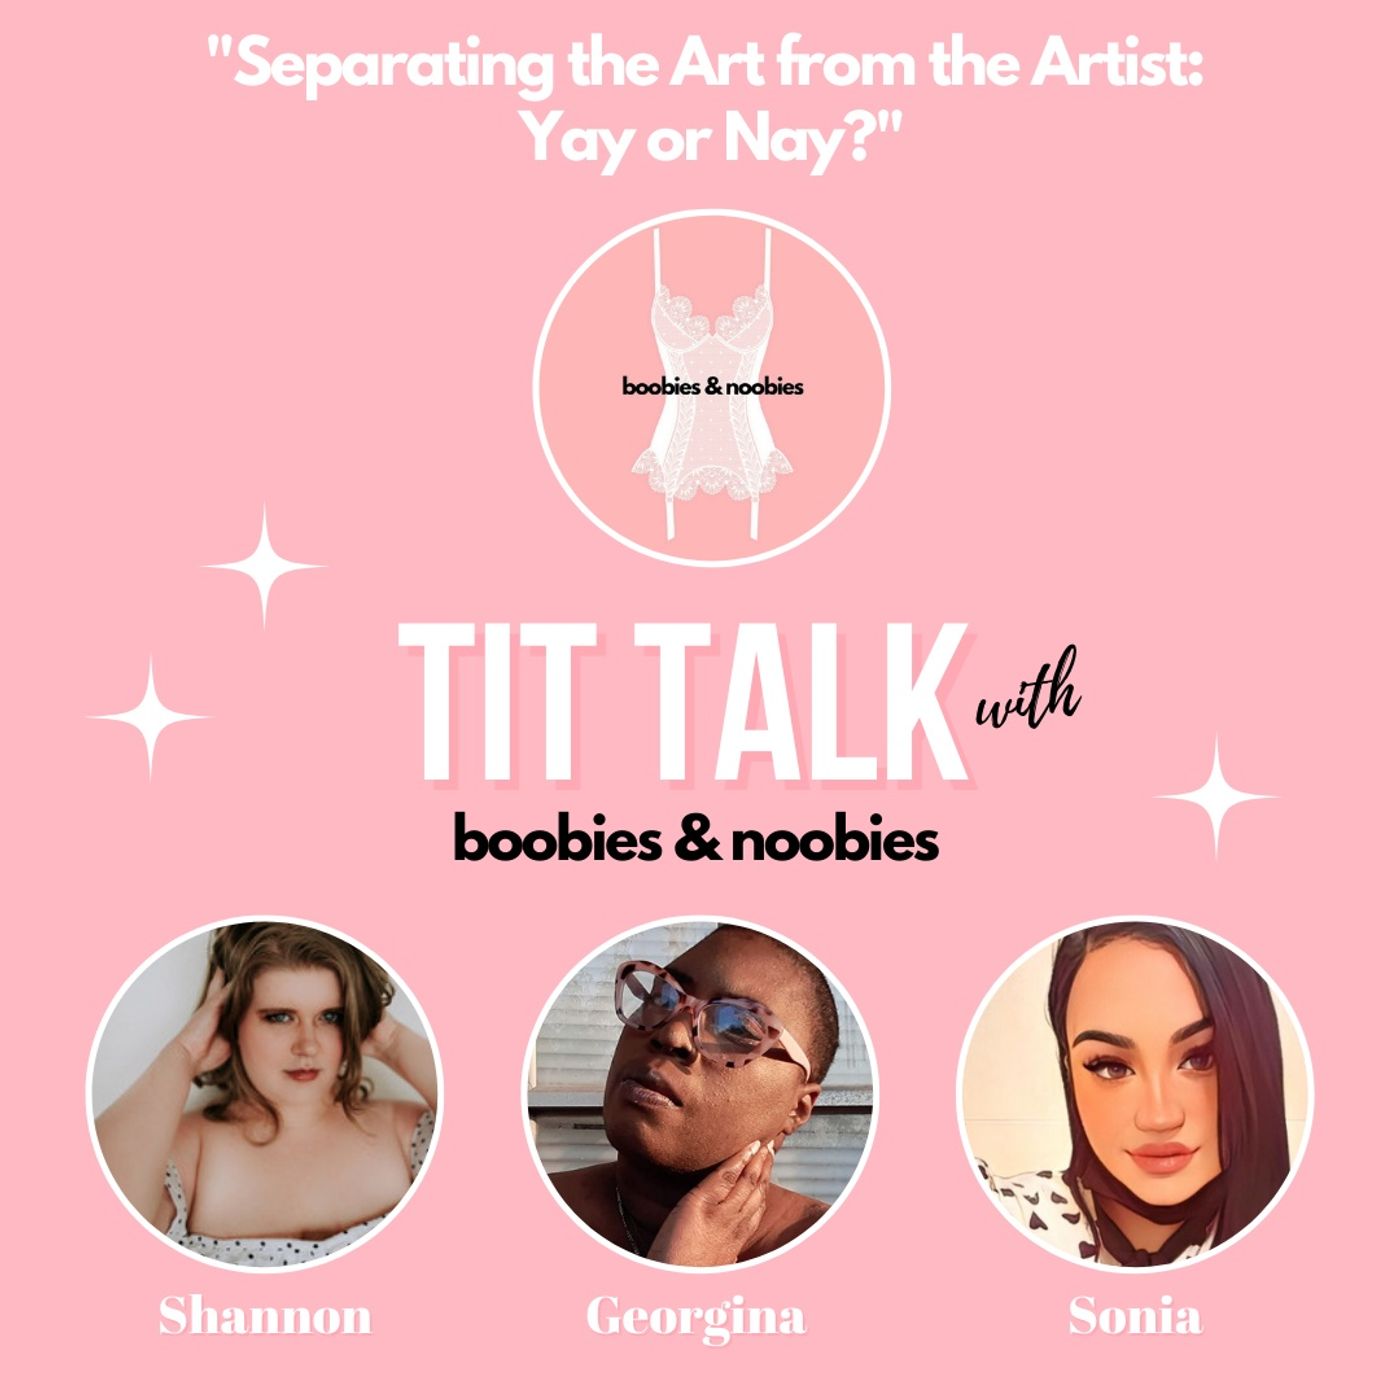 Tit Talk: Separating the Art from the Artist – Yay or Nay?